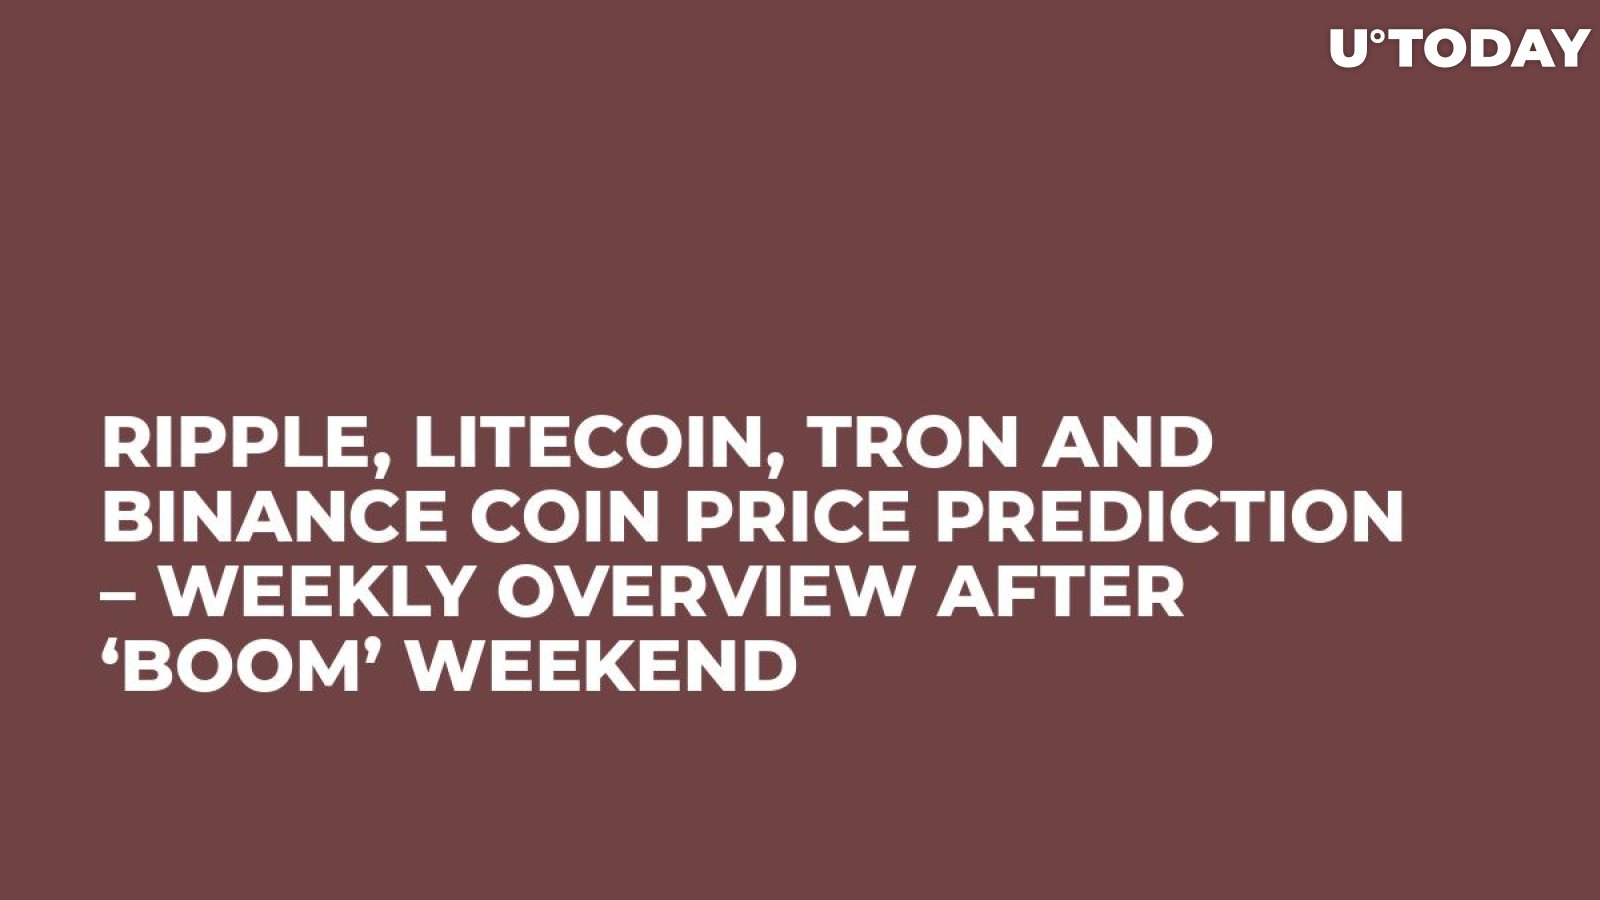 Ripple, Litecoin, Tron and Binance Coin Price Prediction – Weekly Overview After ‘Boom’ Weekend